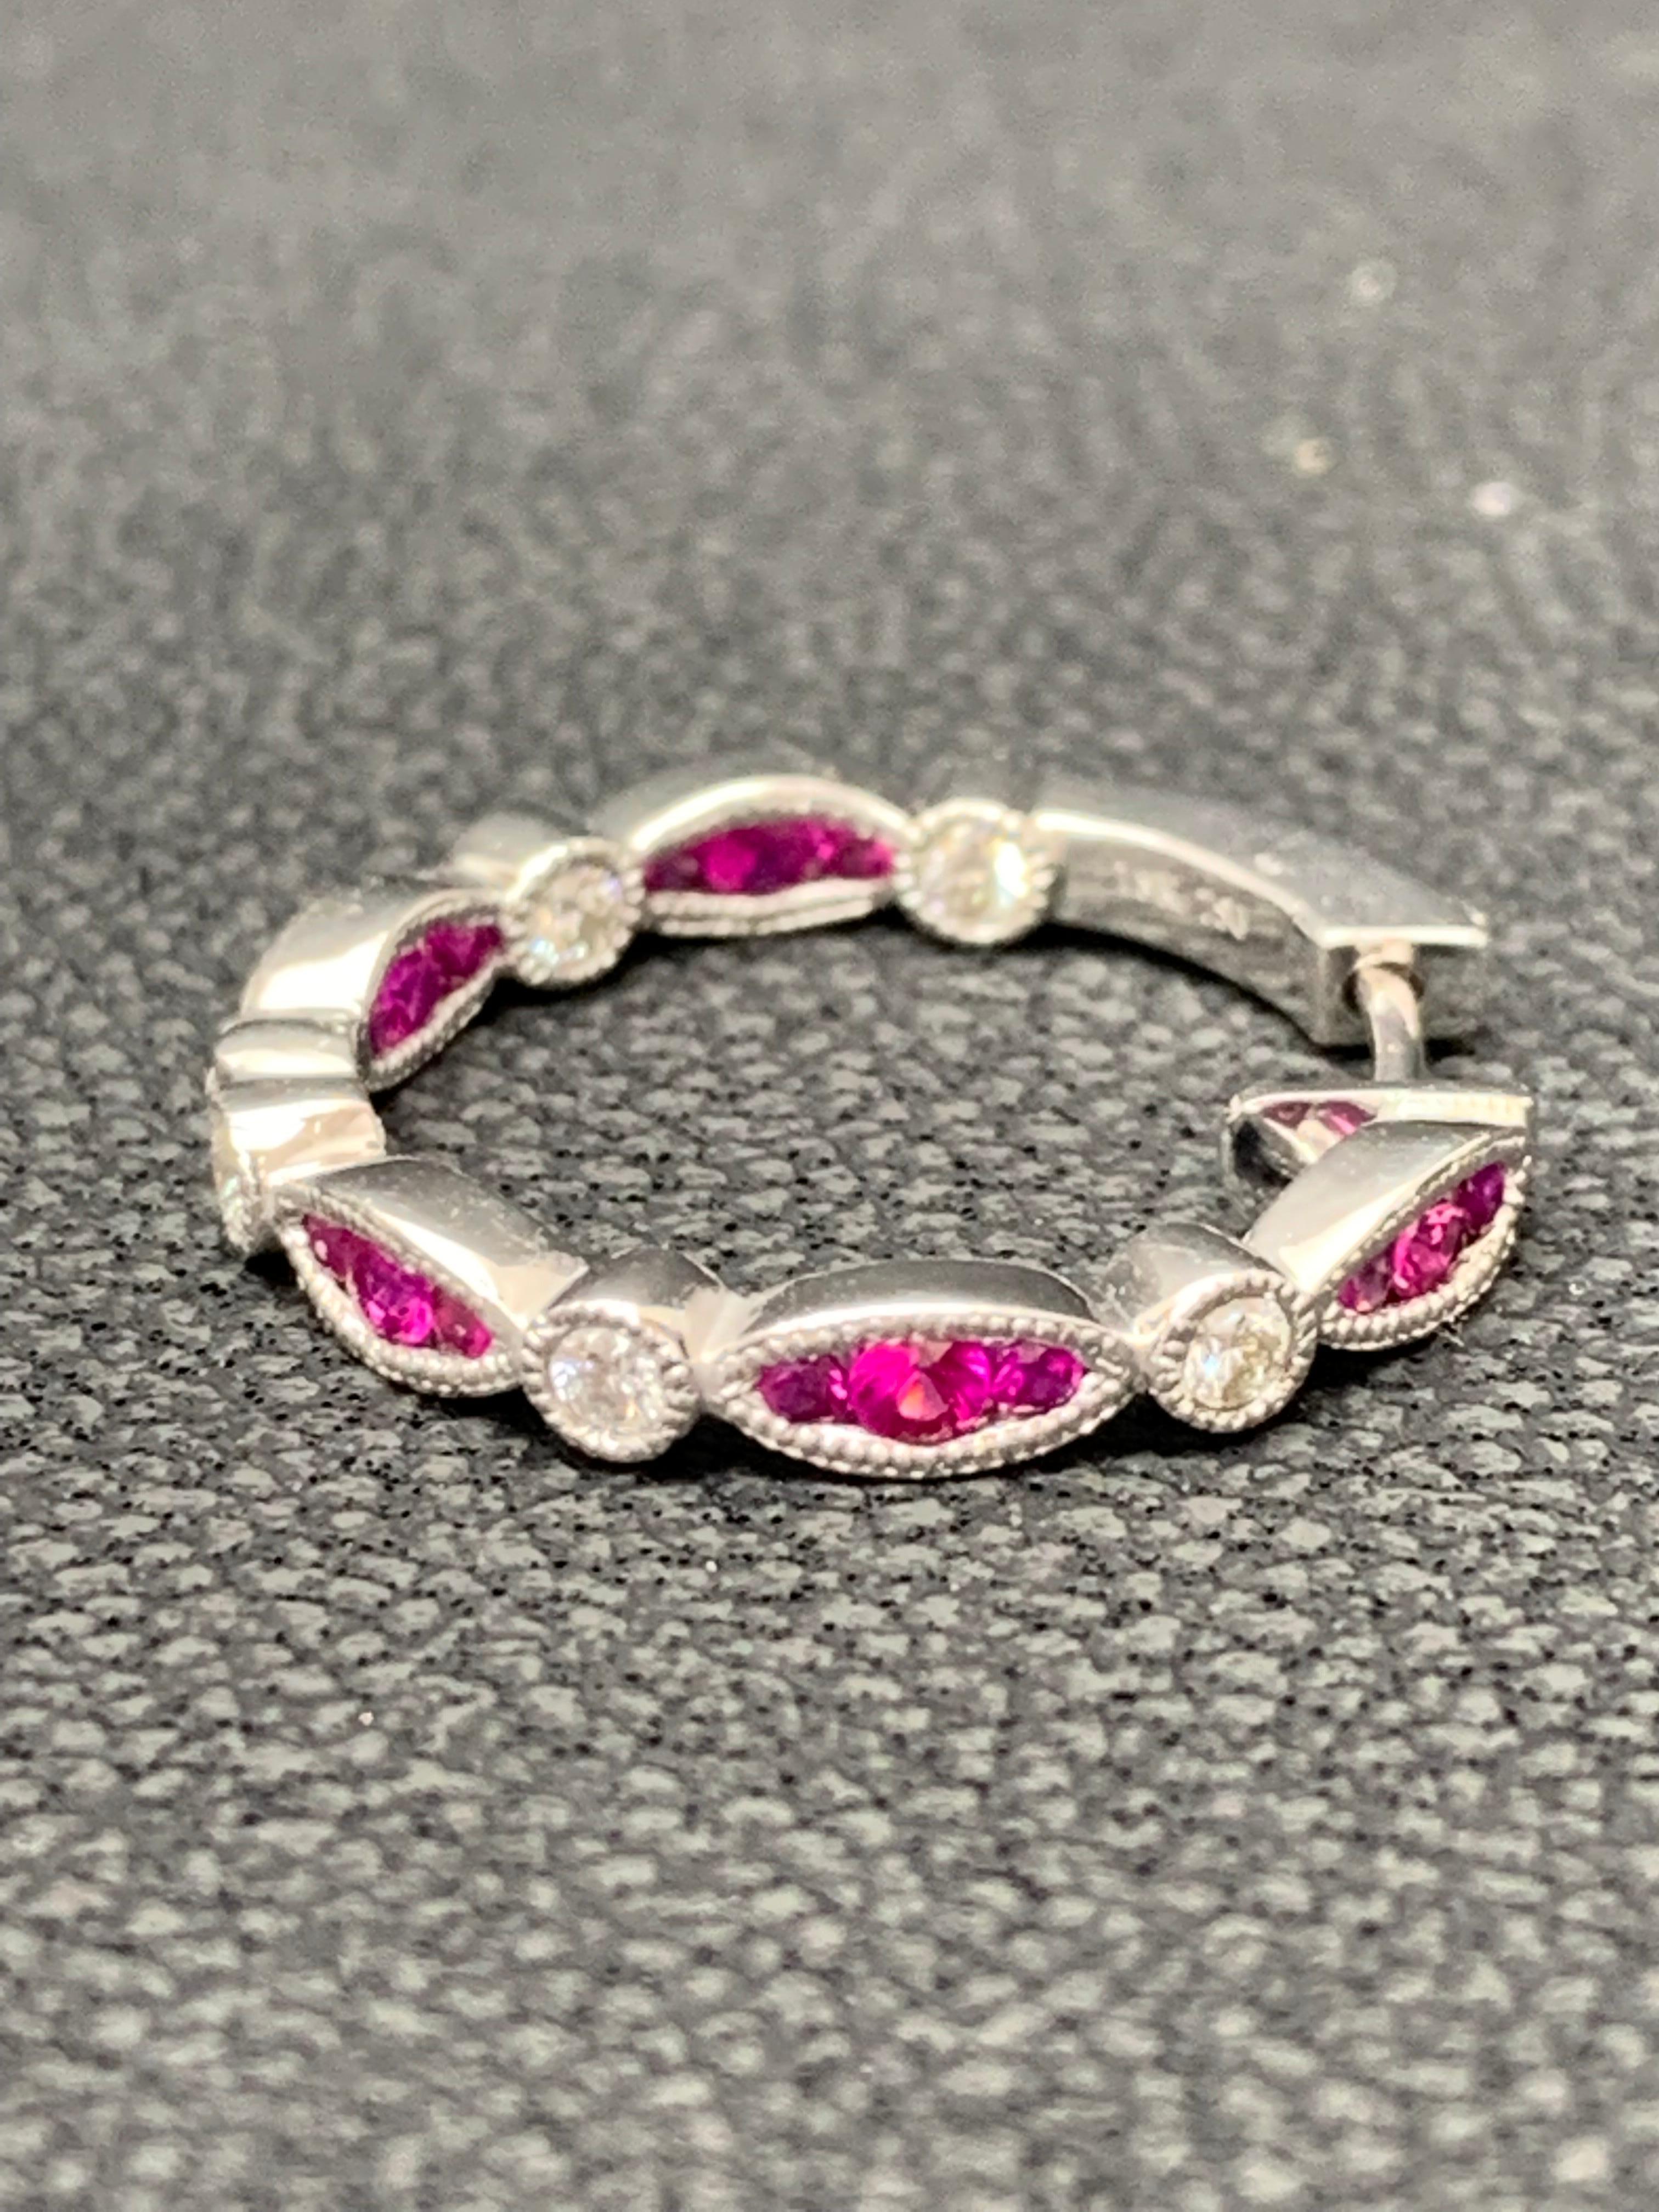 A unique piece of hoop earrings showcasing a row of  20 round Rubies and 10 diamonds, set in a bezel made in 18k white gold. Rubies weigh 0.81 carat and Diamonds weigh 0.26 carats total.
Style available in different price ranges. Prices are based on